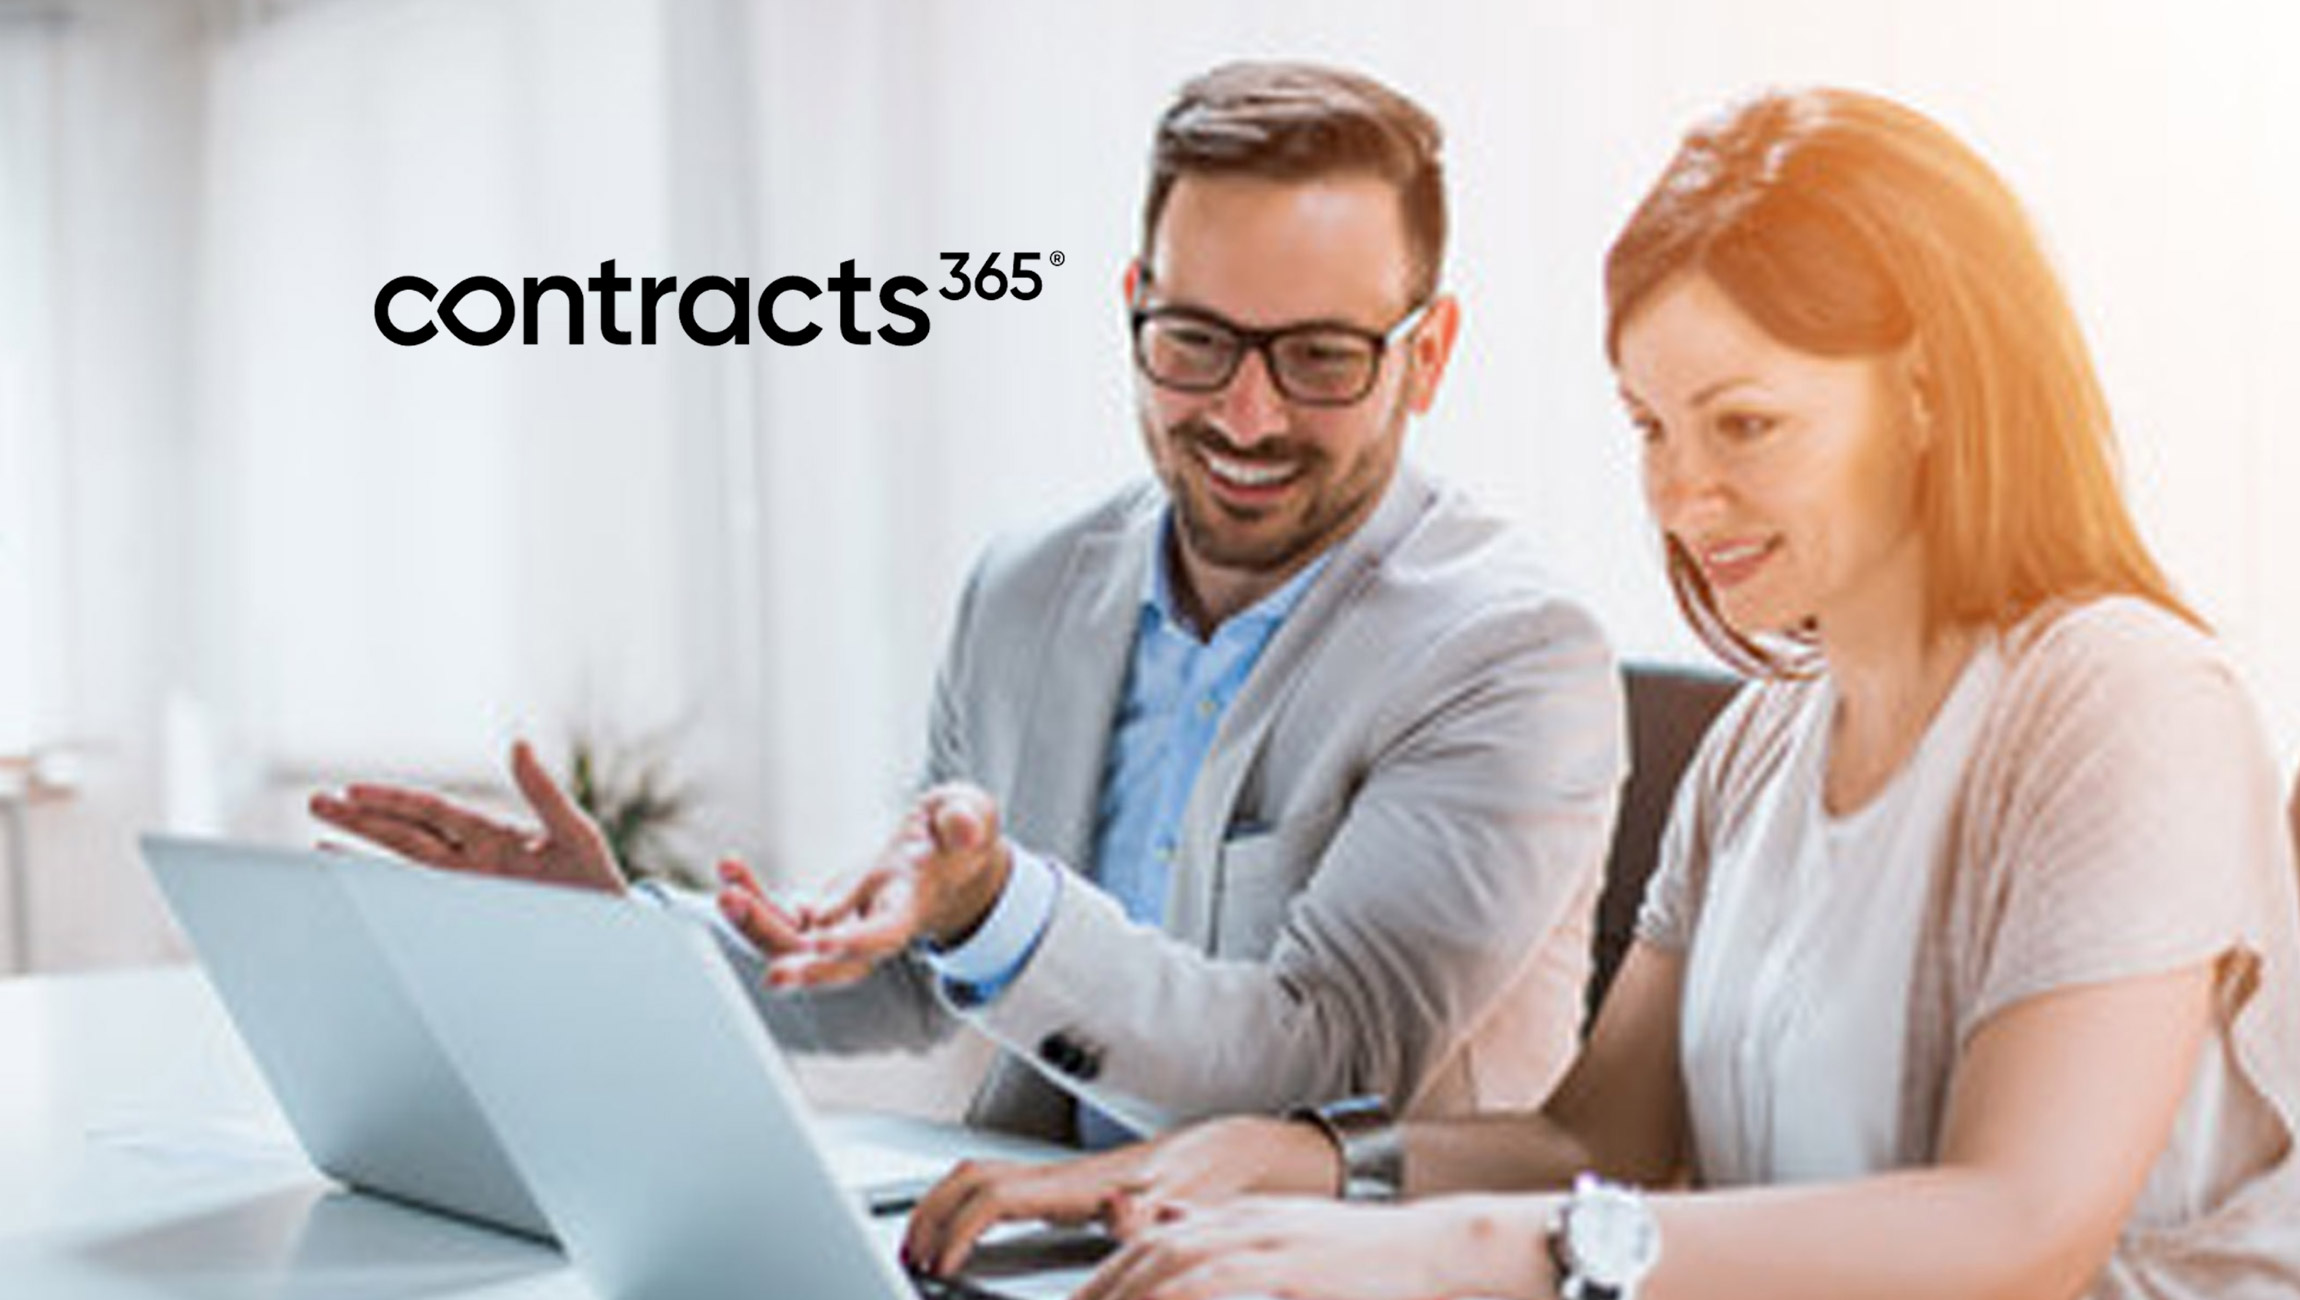 Corridor Company, Inc., a Leader in Contract Management Solutions, Announces Corporate Name Change to Contracts 365, Inc.